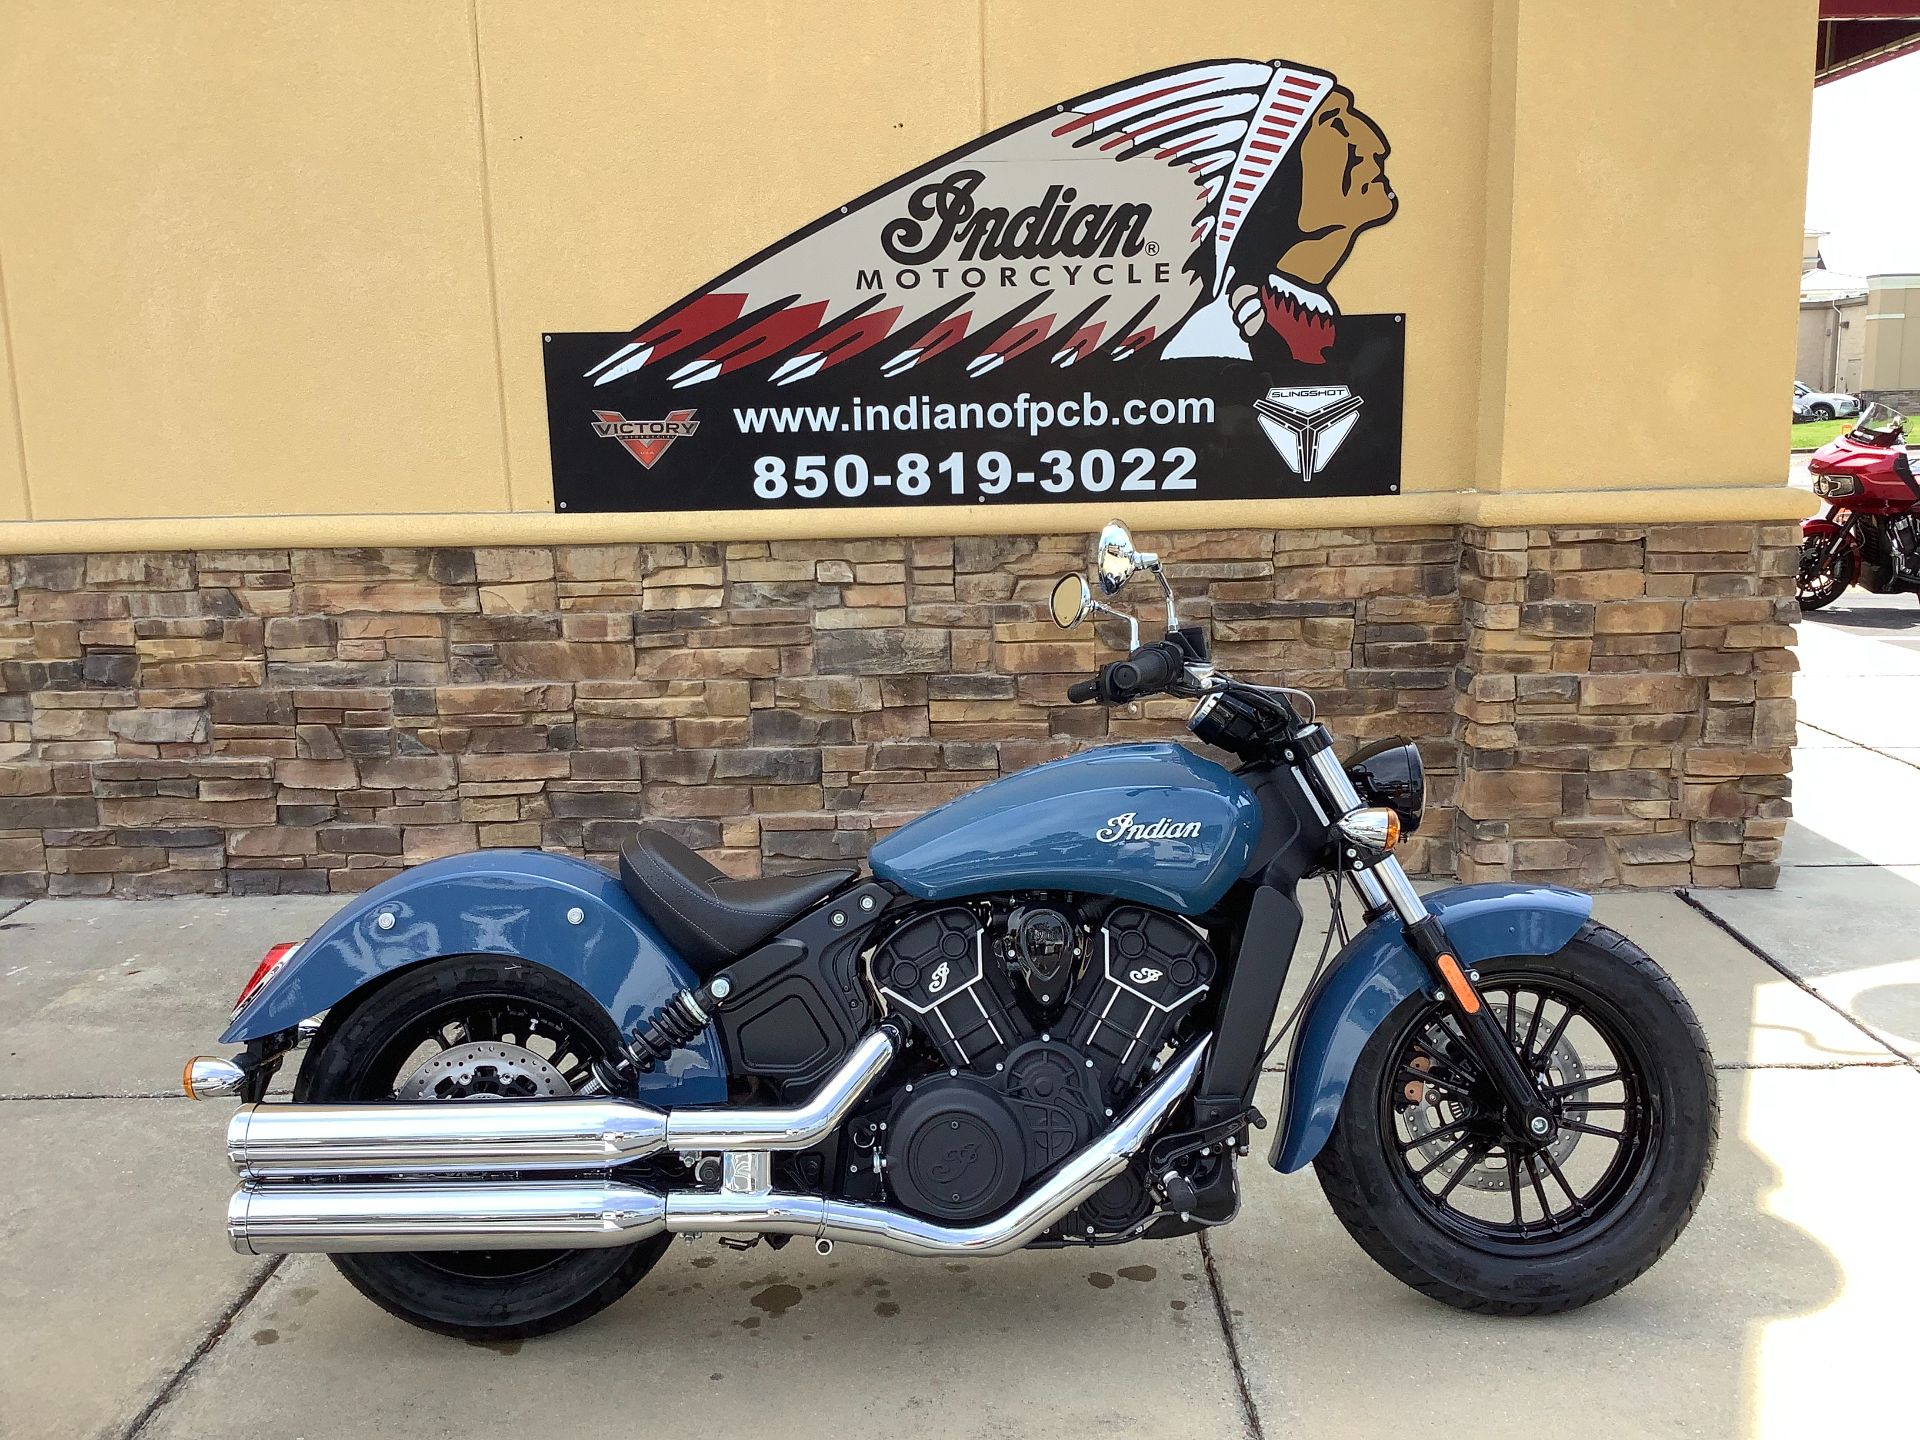 2022 Indian SCOUT 60 in Panama City Beach, Florida - Photo 1